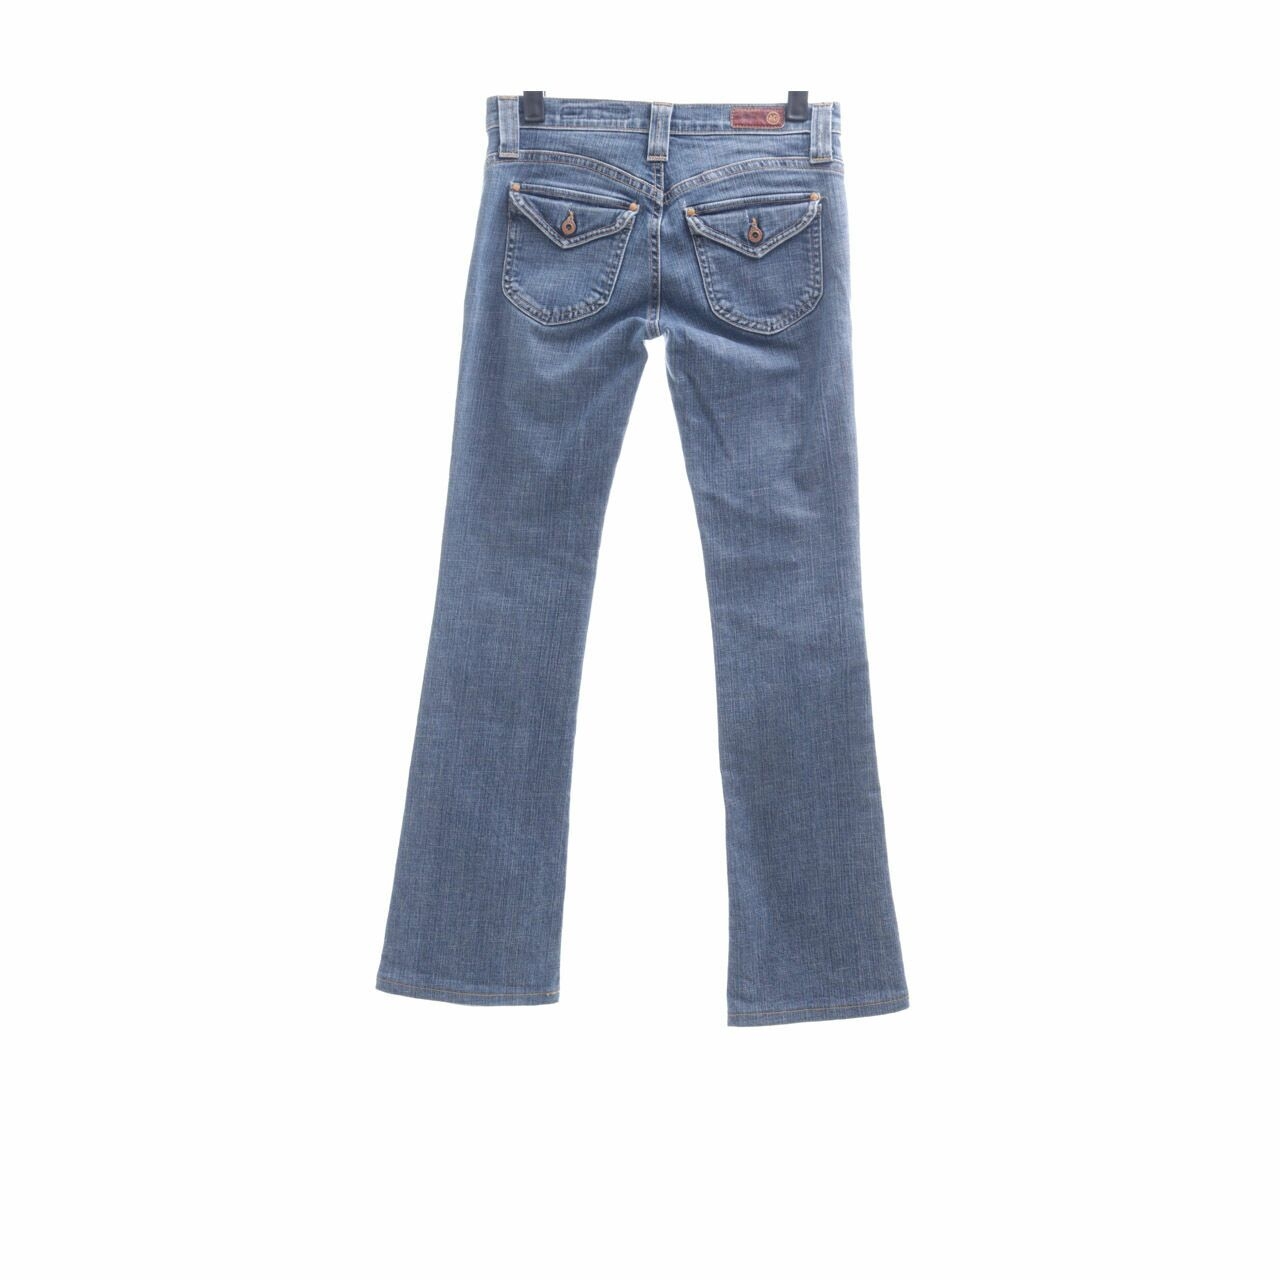 Adriano Goldschmied Dark Blue Washed Pants